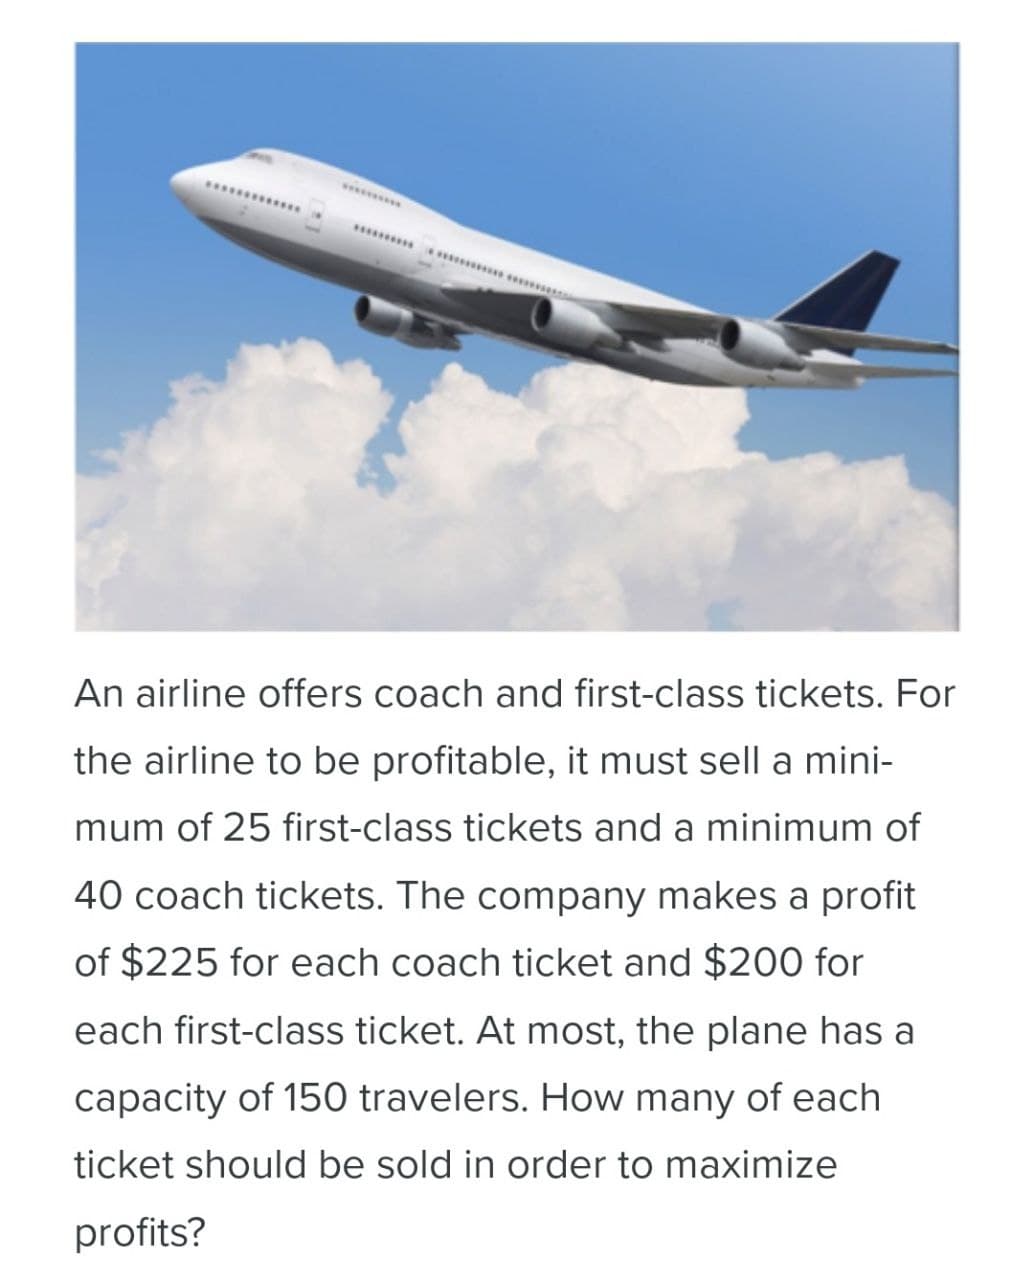 An airline offers coach and first-class tickets. For
the airline to be profitable, it must sell a mini-
mum of 25 first-class tickets and a minimum of
40 coach tickets. The company makes a profit
of $225 for each coach ticket and $200 for
each first-class ticket. At most, the plane has a
capacity of 150 travelers. How many of each
ticket should be sold in order to maximize
profits?
